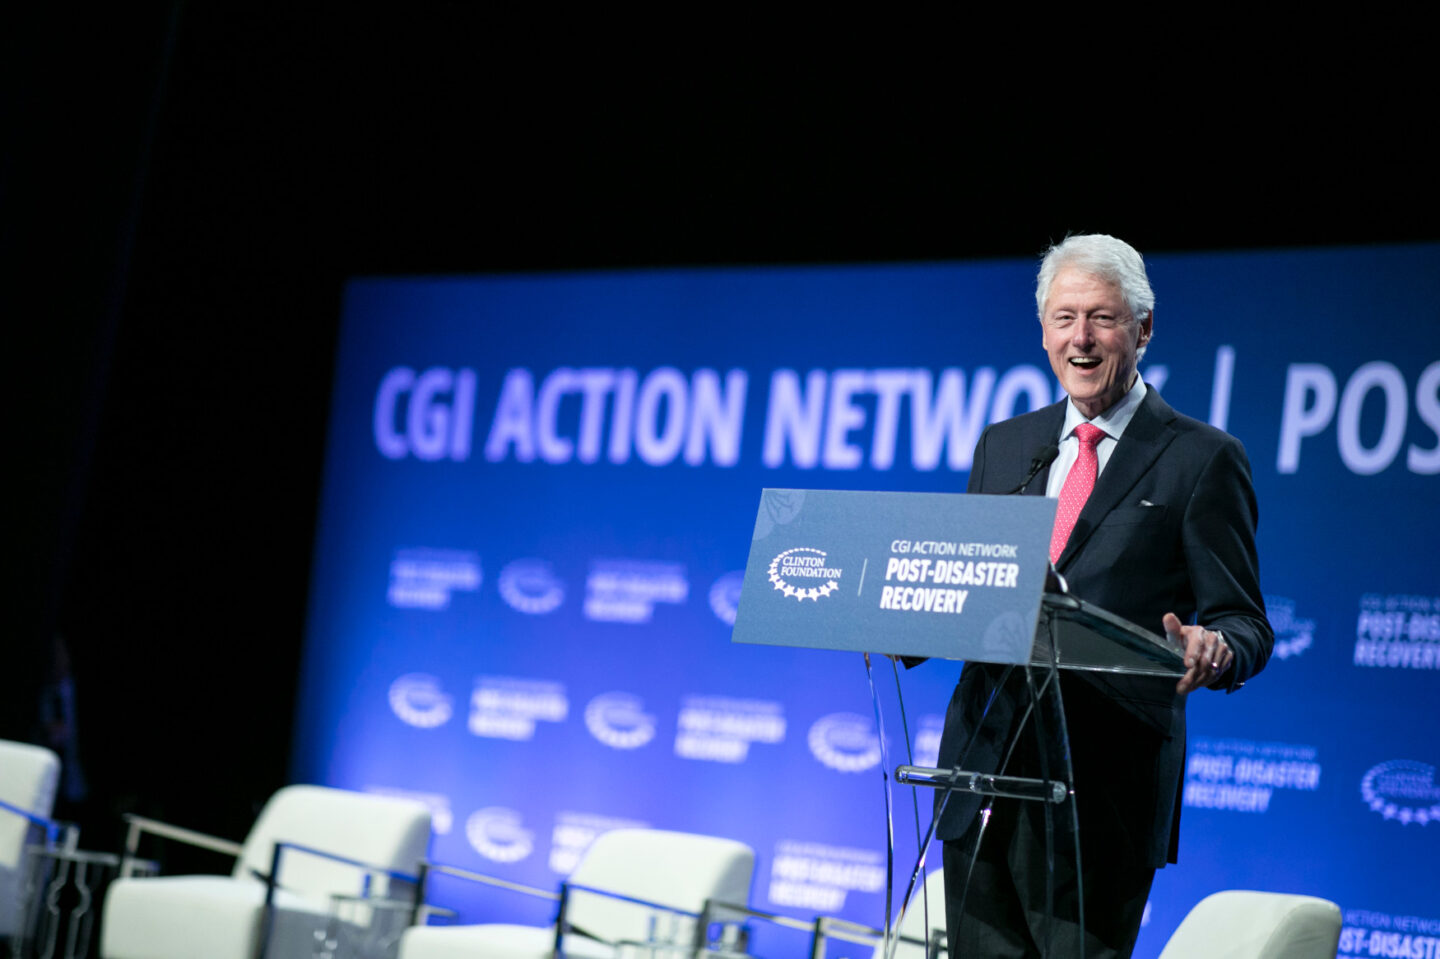 President Clinton speaks on stage during a plenary session